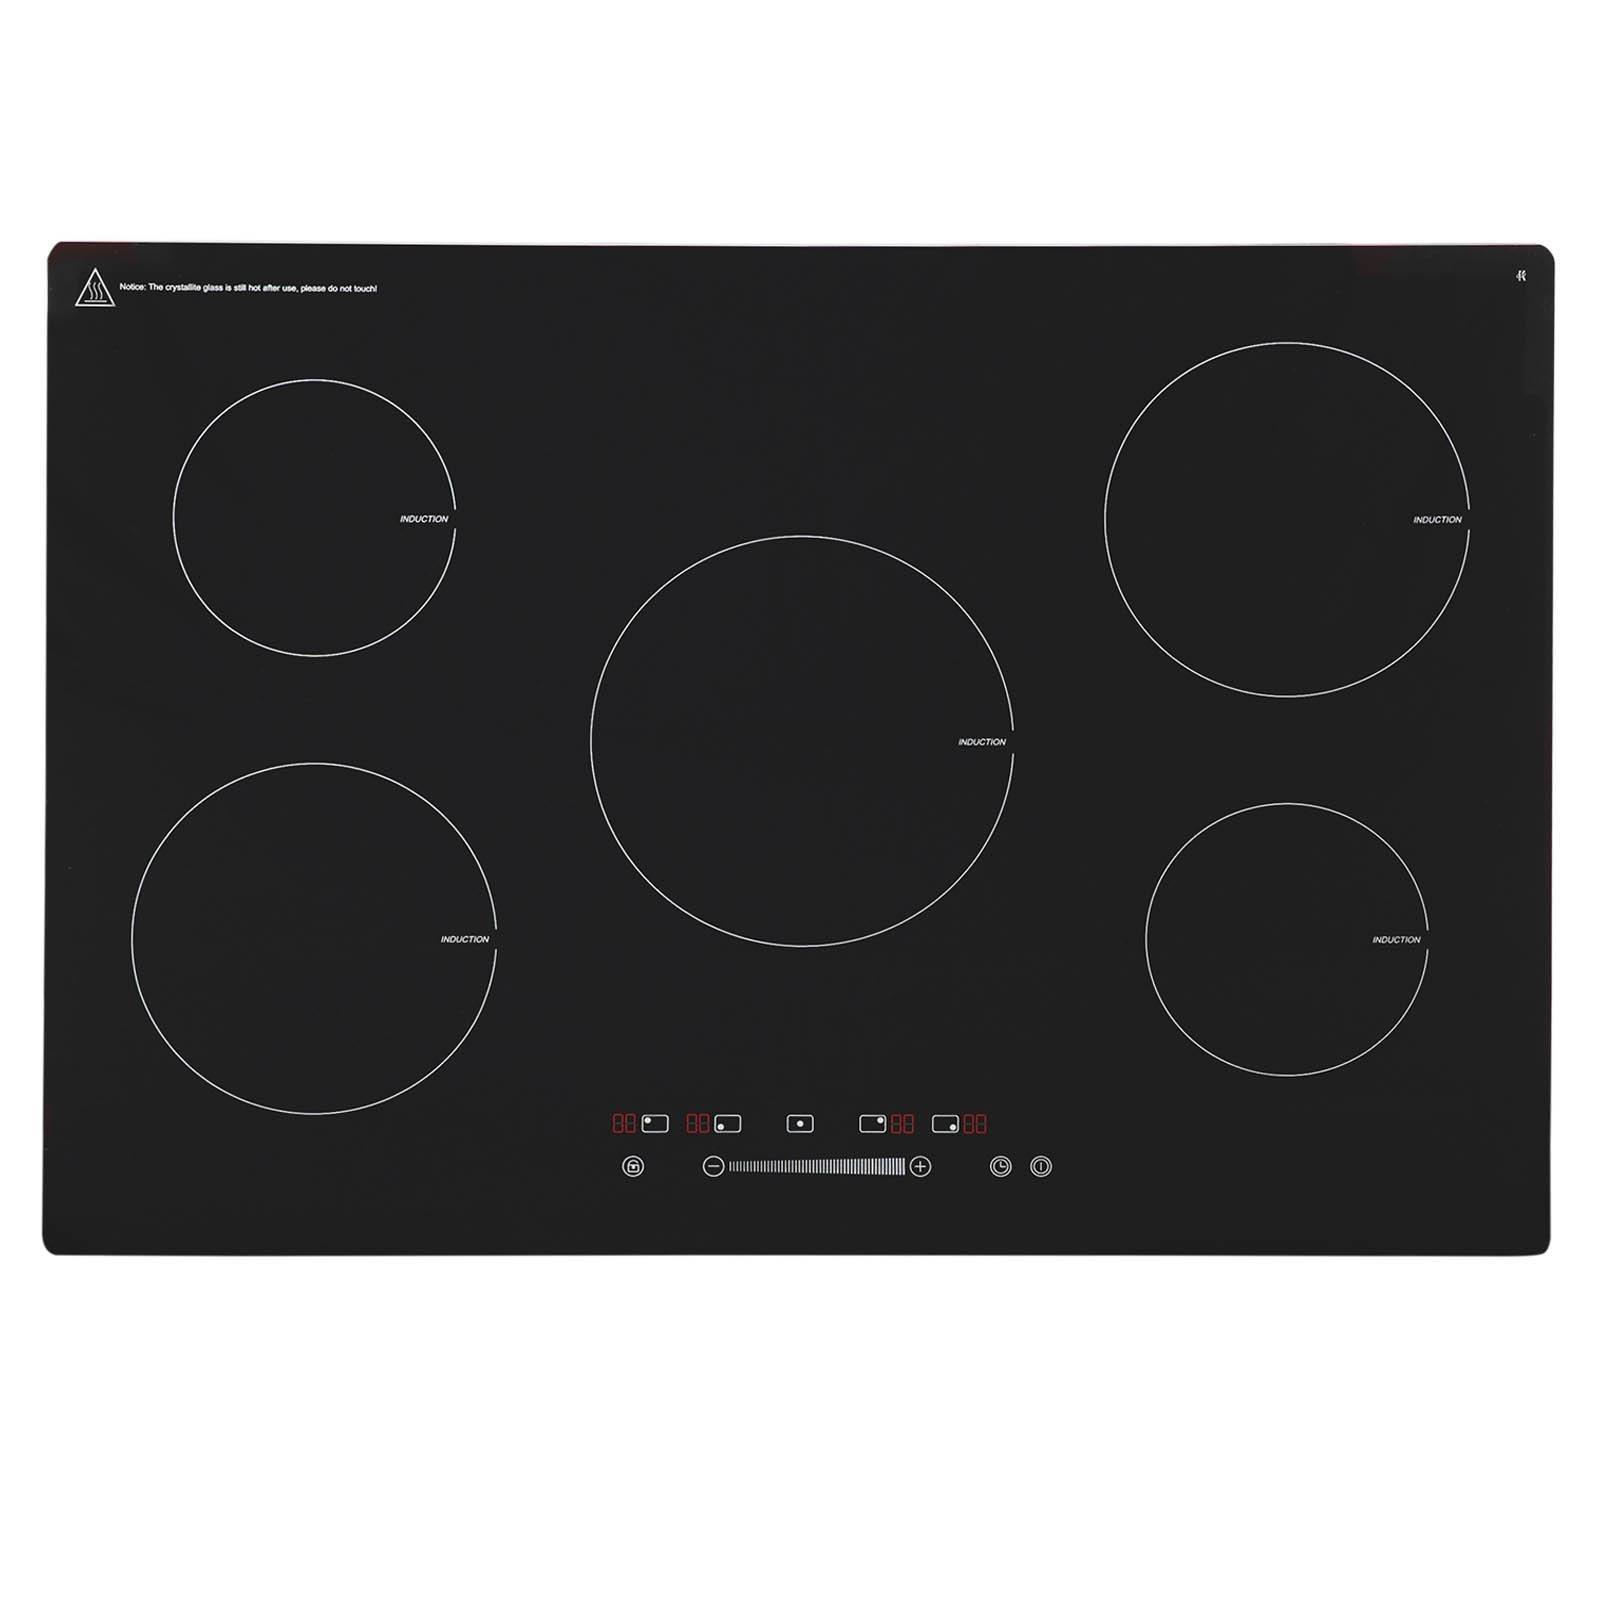 INDH75BL 75cm Black Touch Control 5 Zone Induction Hob With Child lock